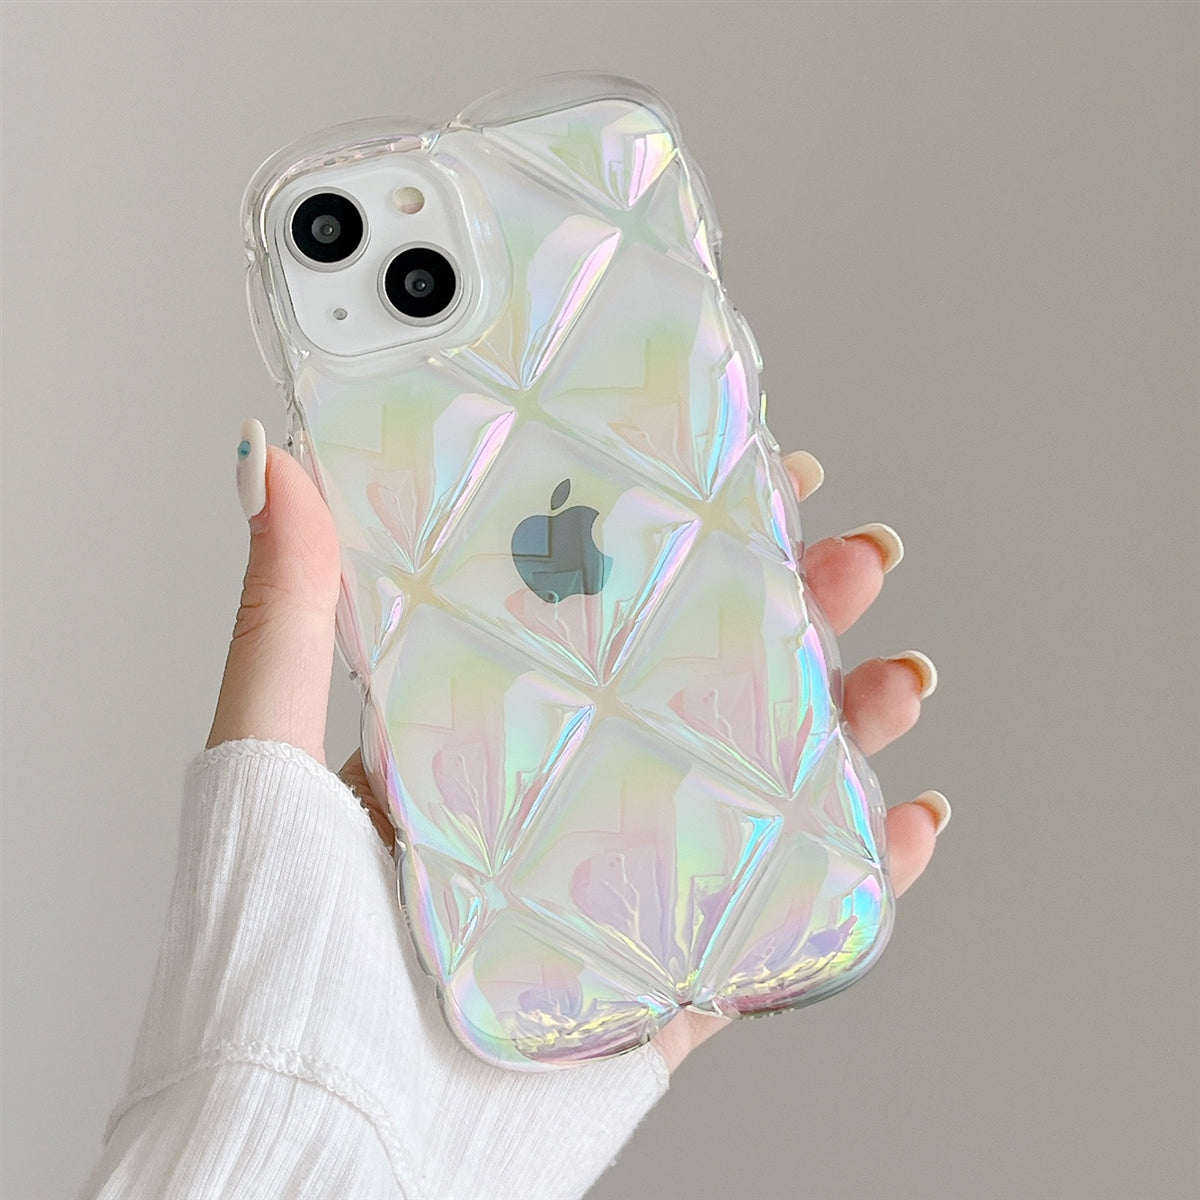 For Apple iPhone 12 Pro Max The Puffer Design Transparent